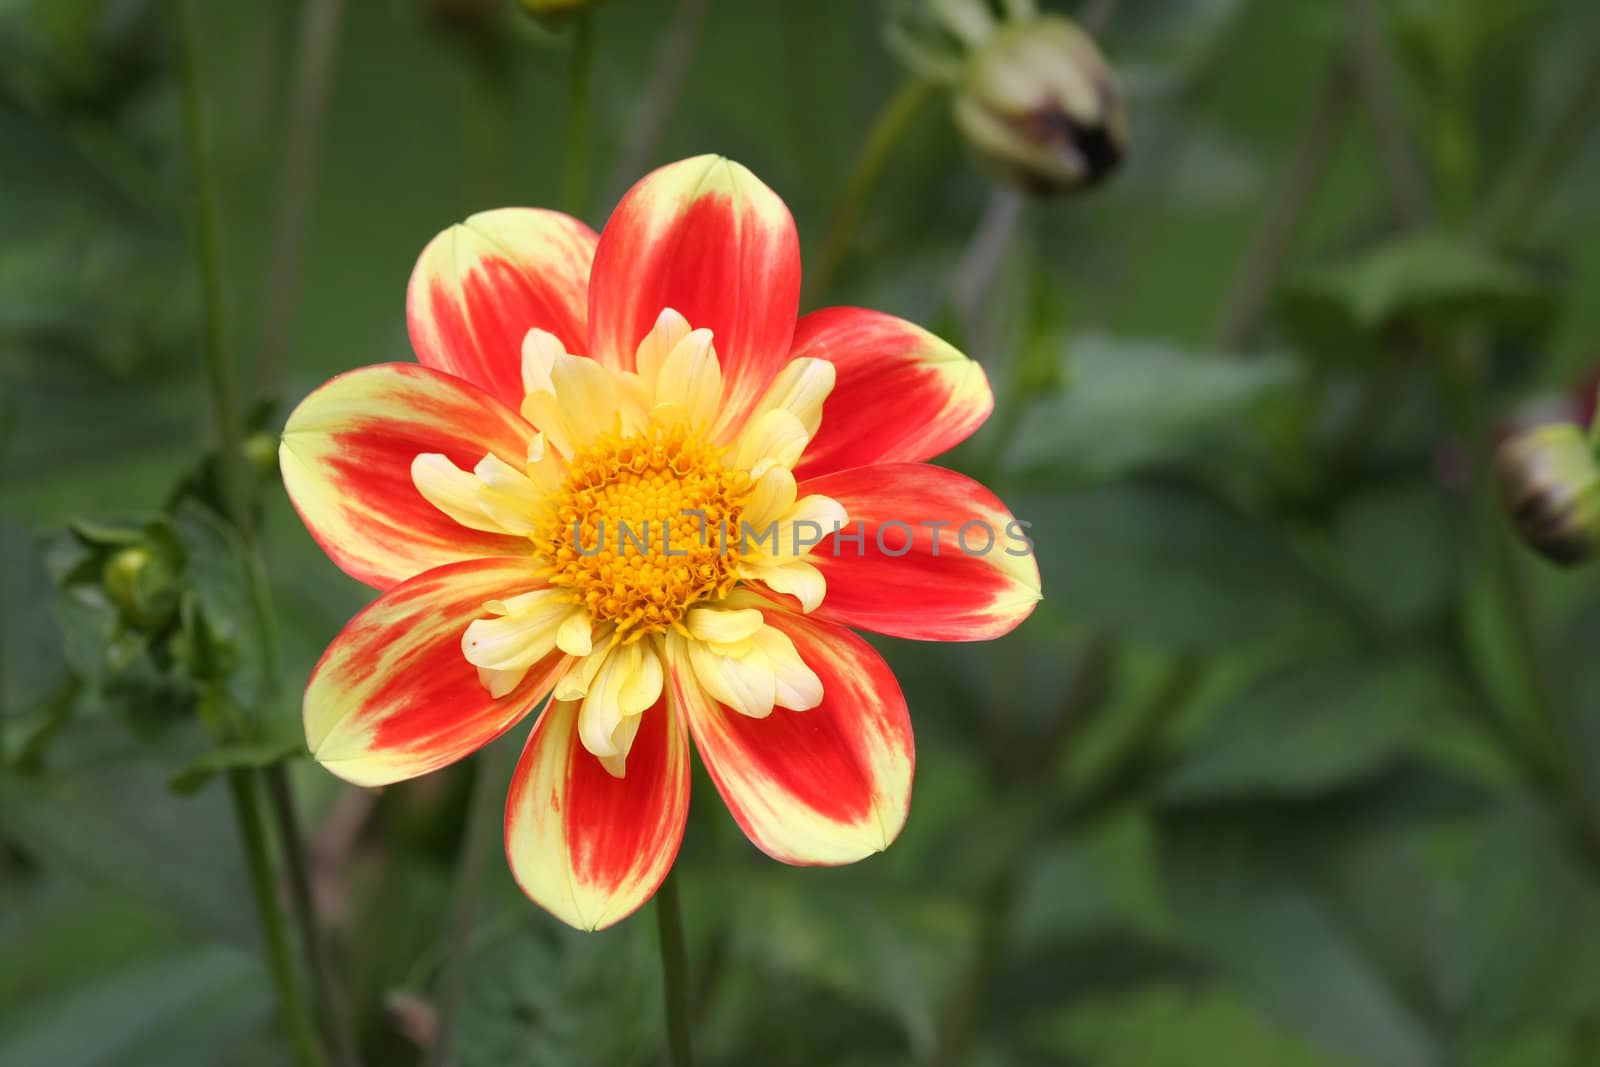 Beautiful flower in red and yellow shines like a sun.